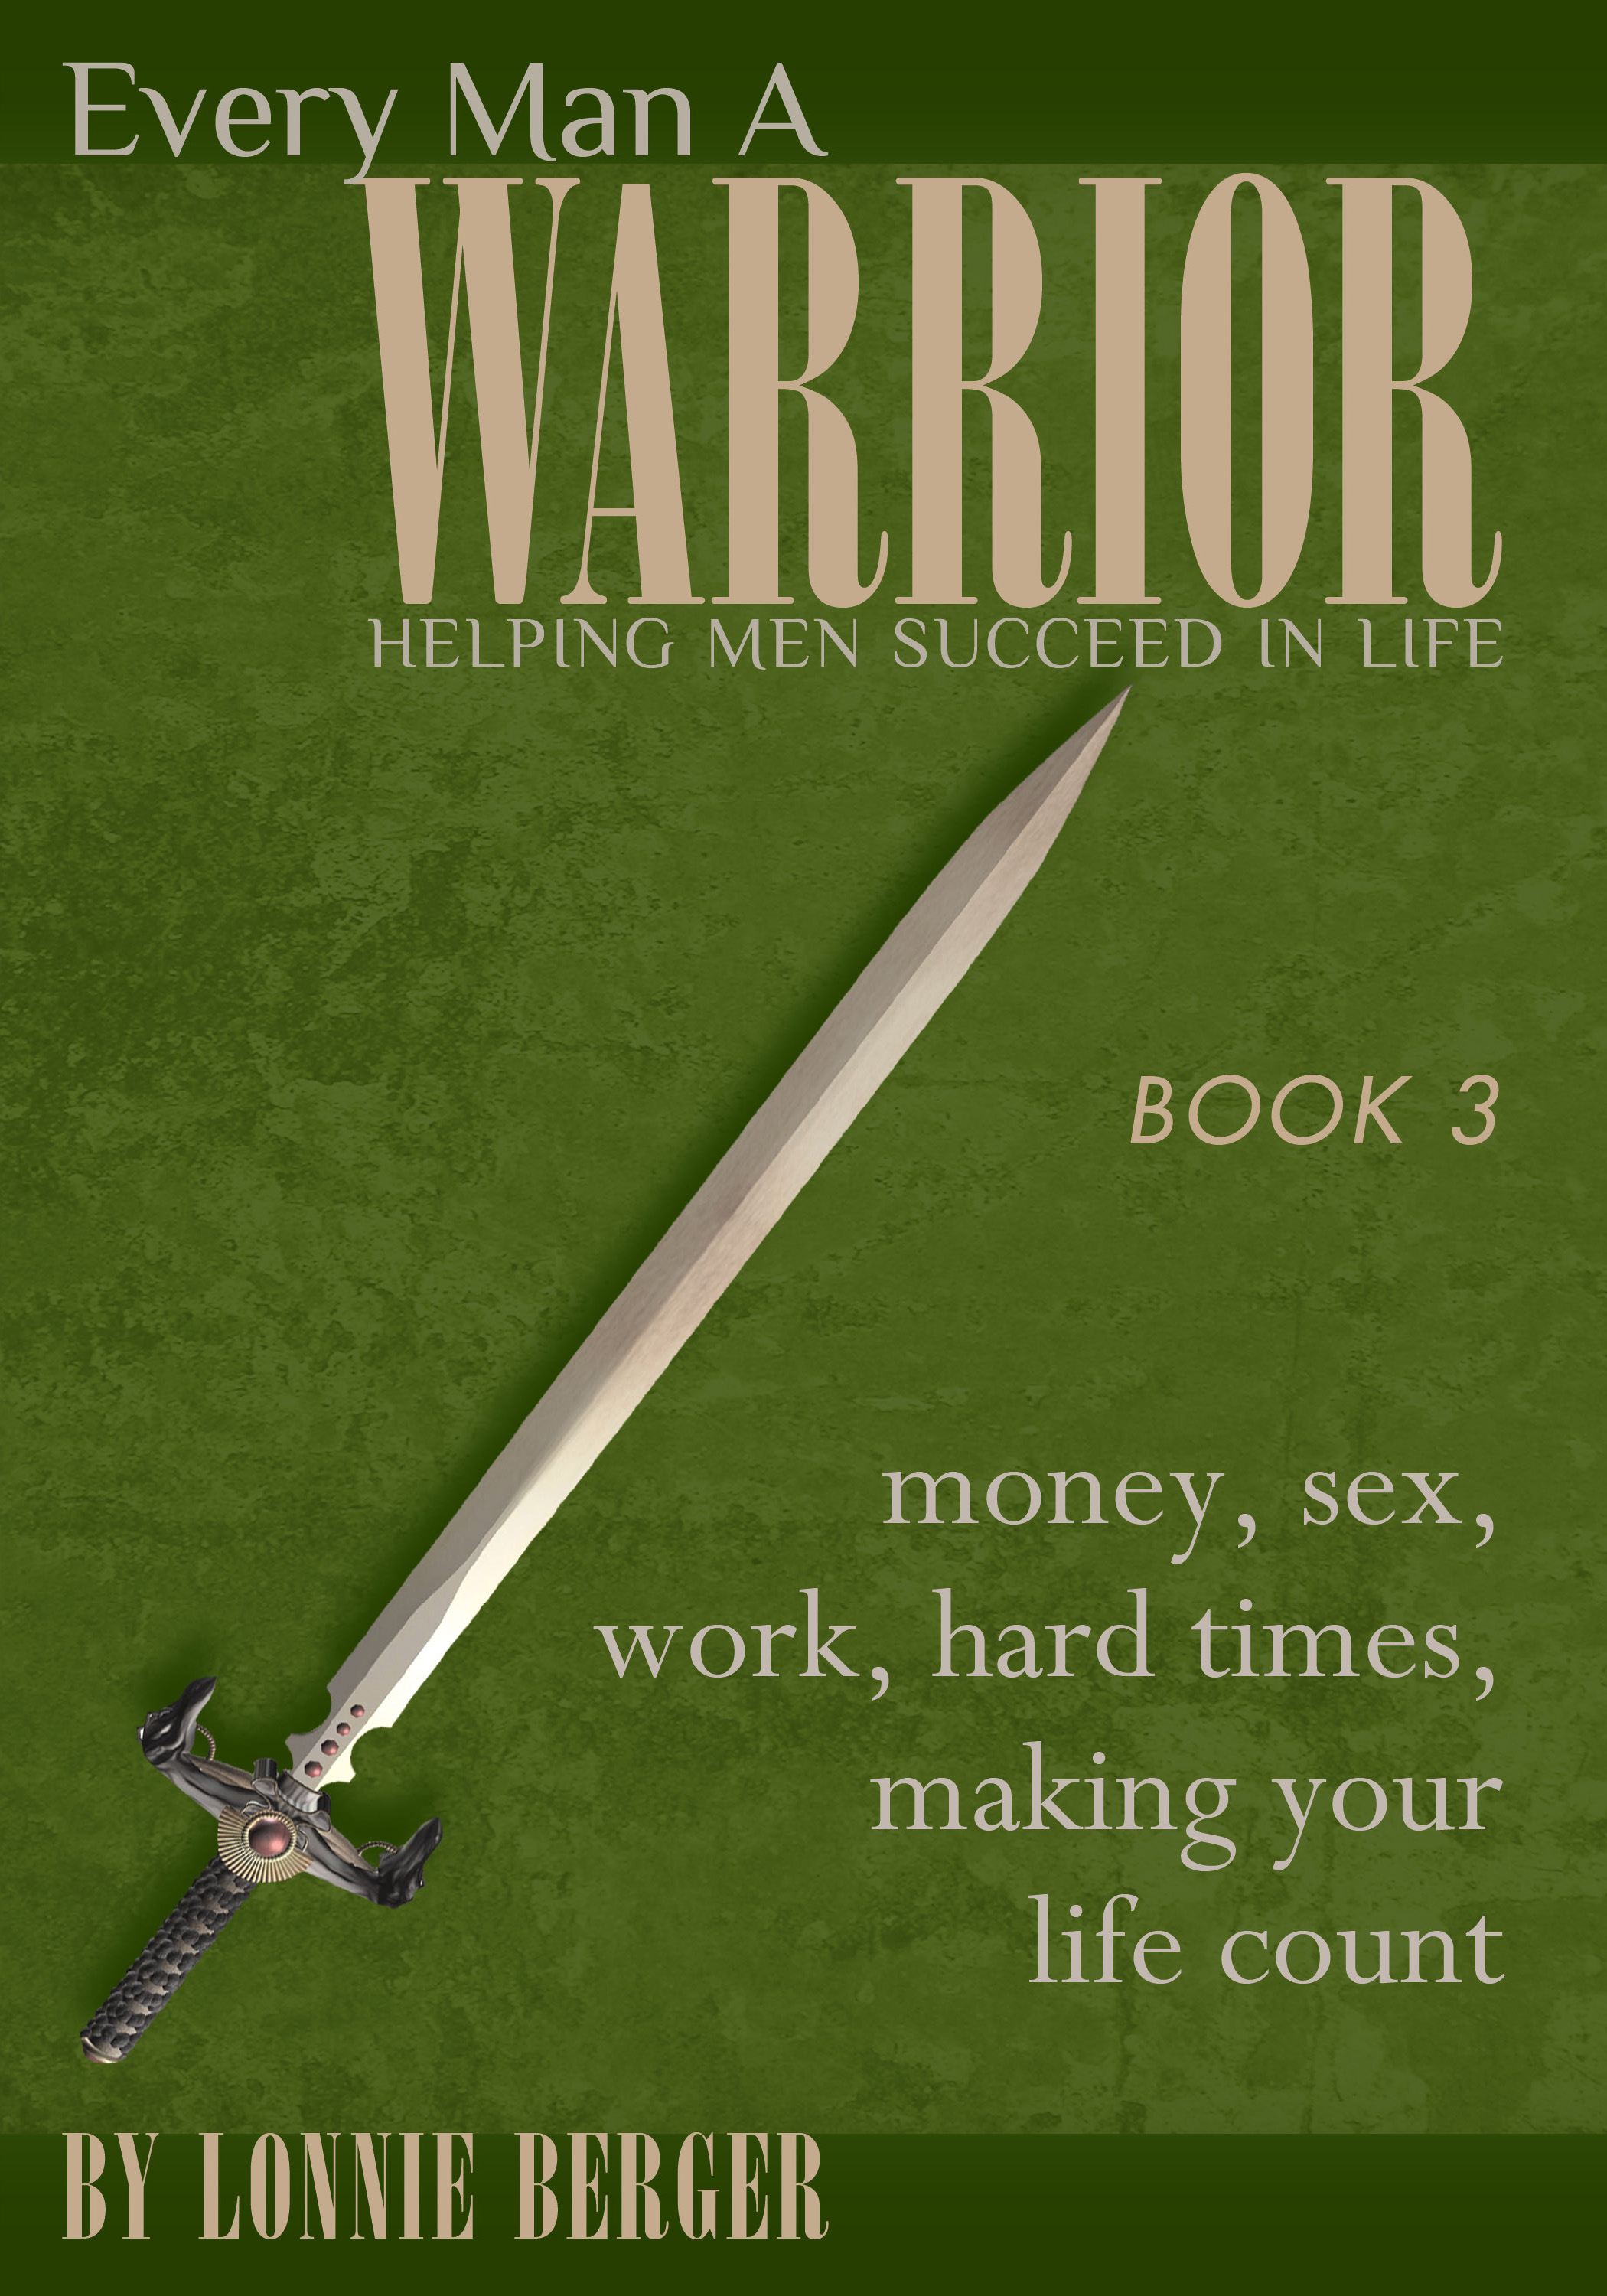 Book Three: Money, Sex, Word, Hard Times, Making Your Life Count